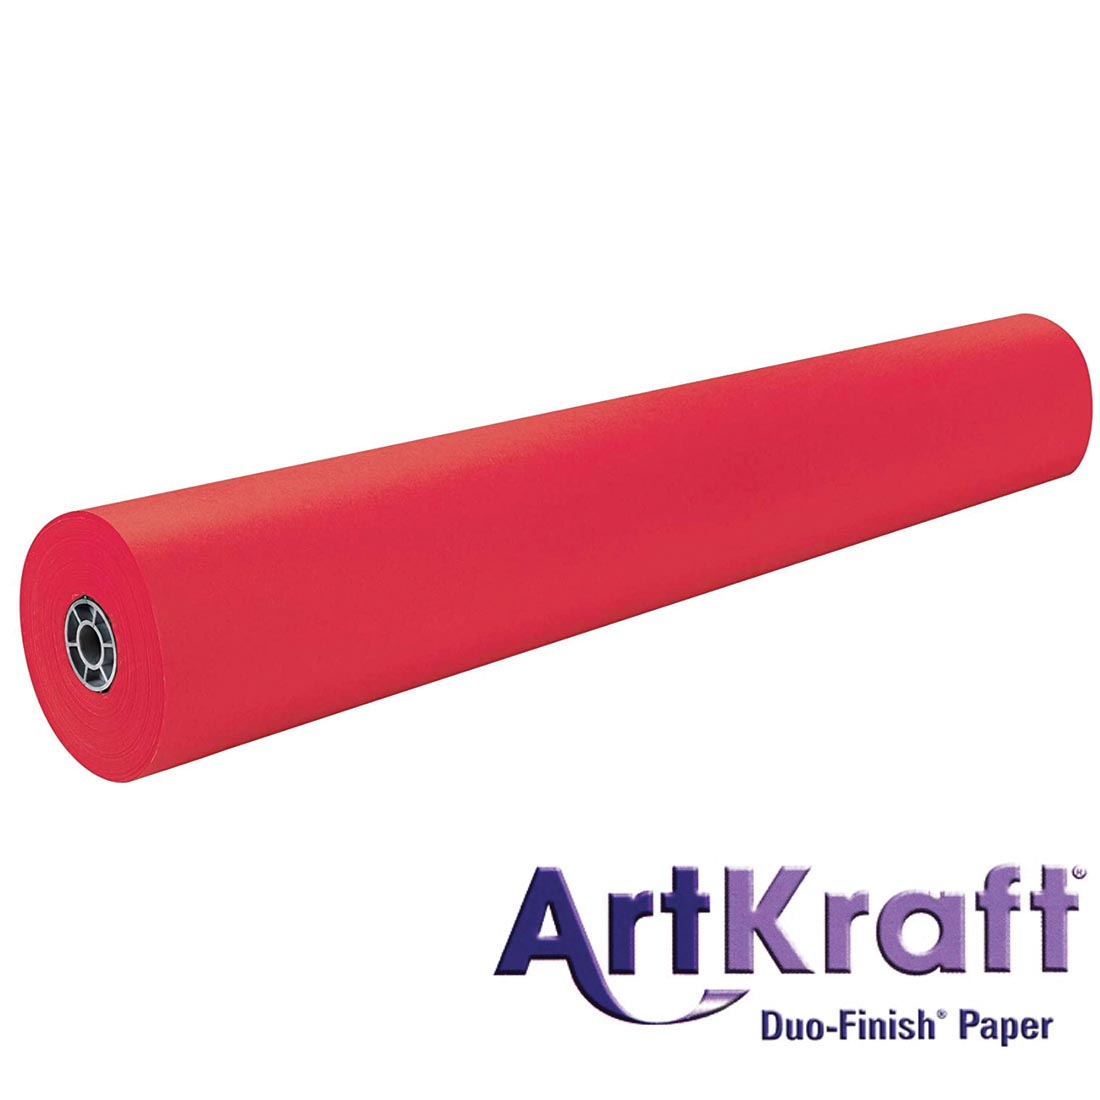 Roll of Flame Paper with text ArtKraft Duo-Finish Paper